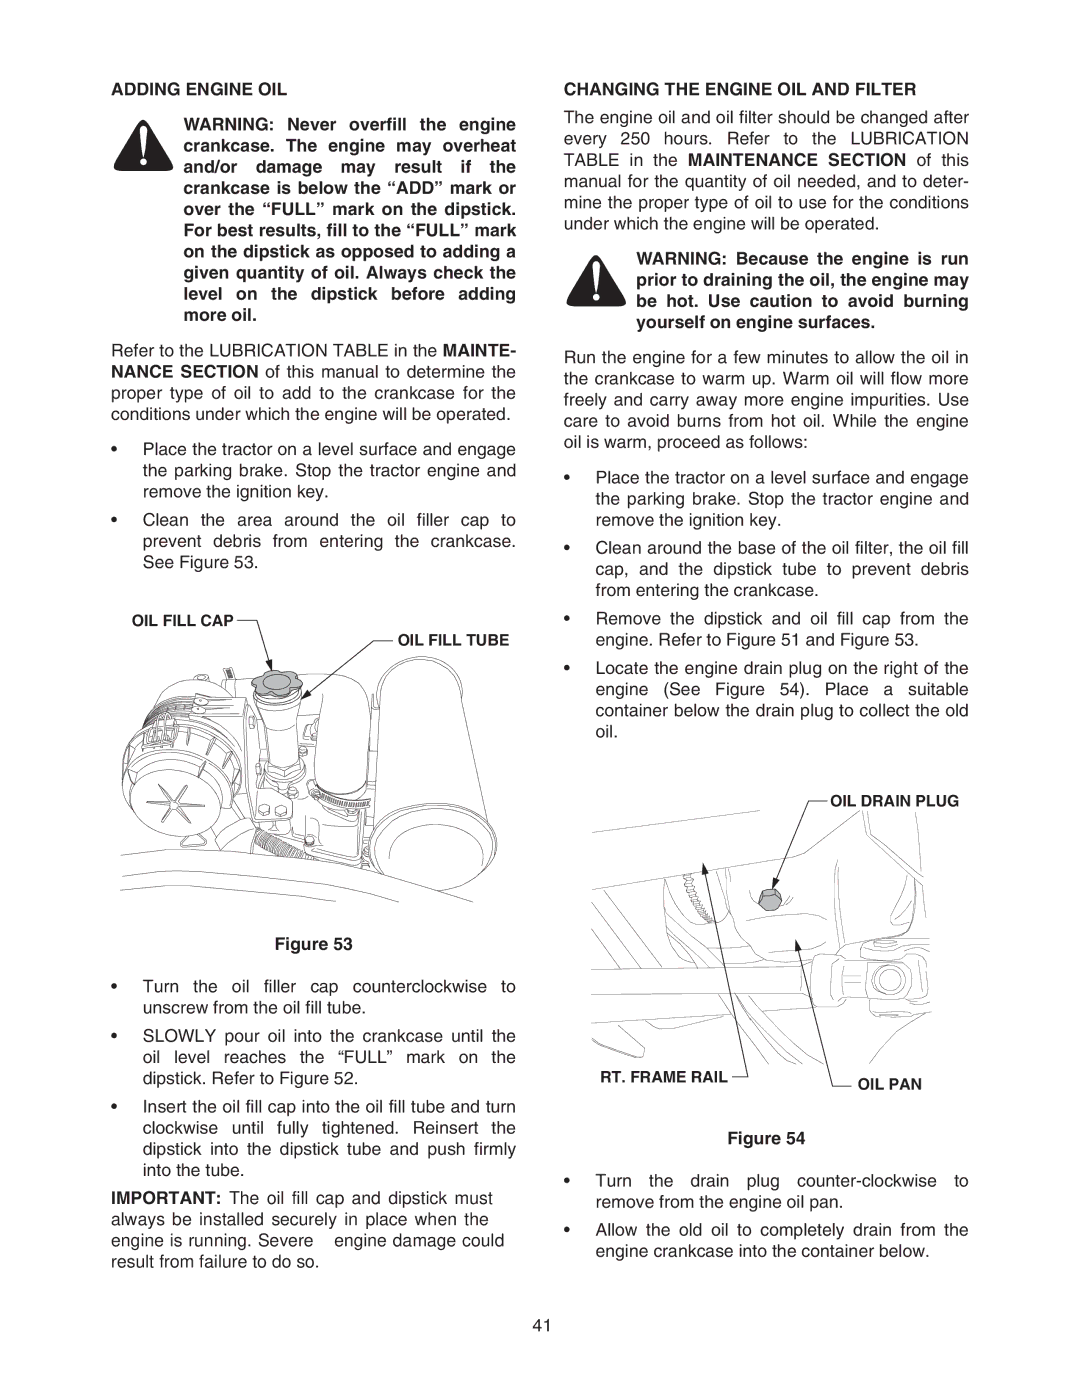 Cub Cadet 6284 manual Adding Engine OIL, Changing the Engine OIL and Filter 